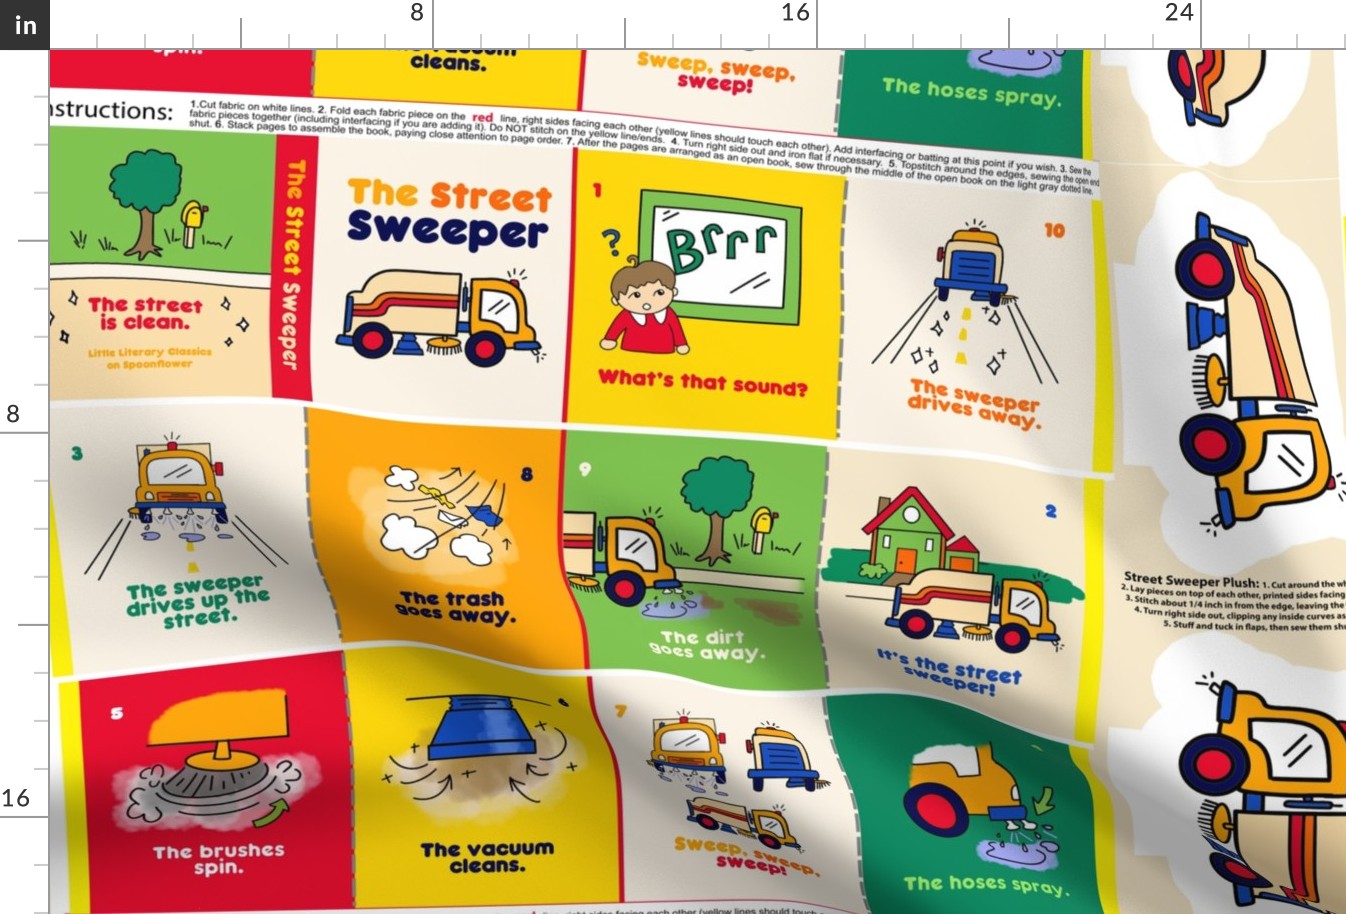 The Street Sweeper cloth book and plush 27 x 18 inches